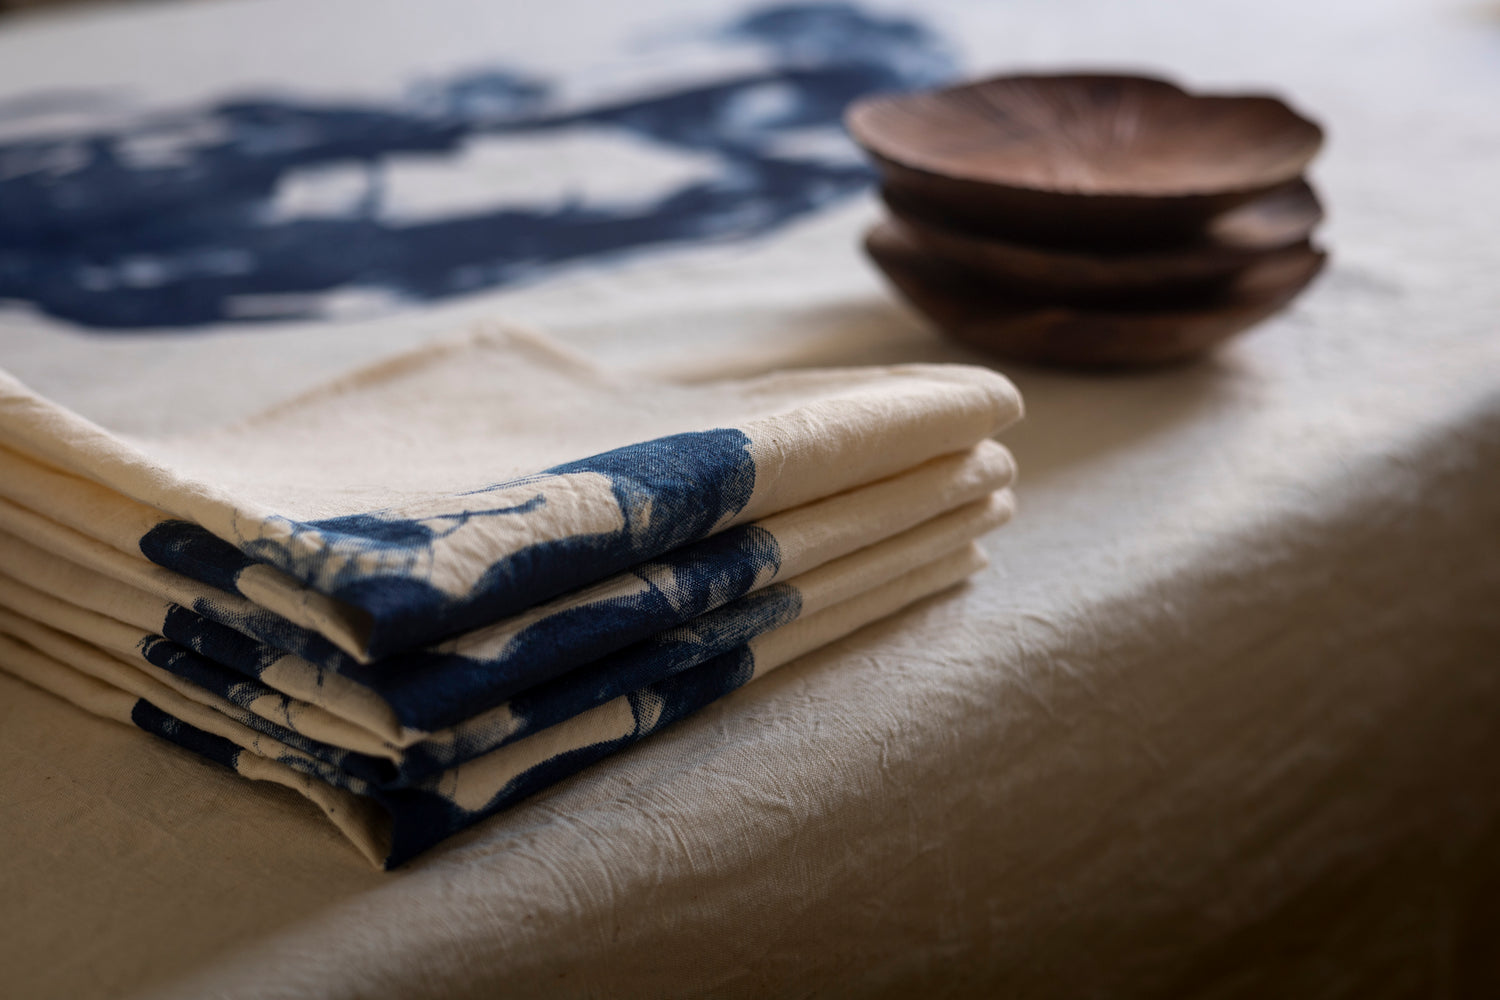 Fumée Bleue" tablecloth and 8 napkins by Safre in collaboration with l'Oeil de KO